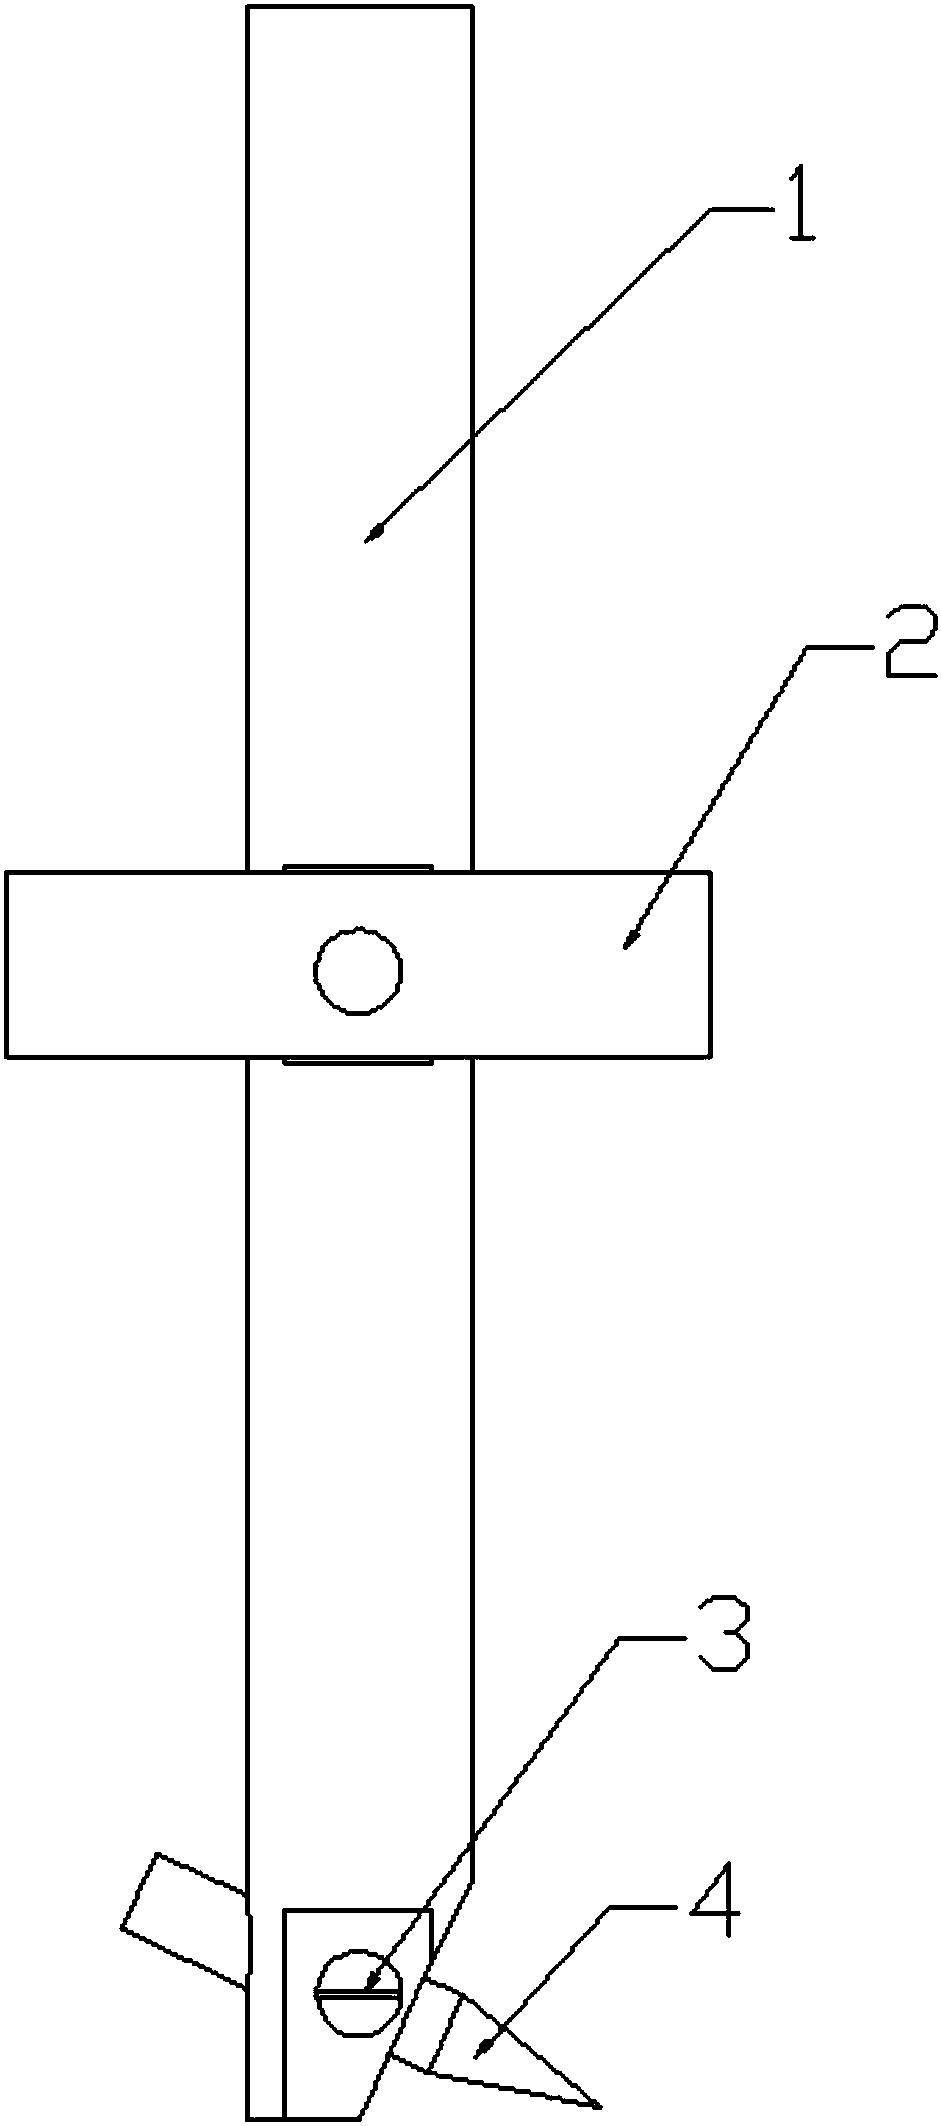 Line scribing pin for machining by computer numerical control milling machine